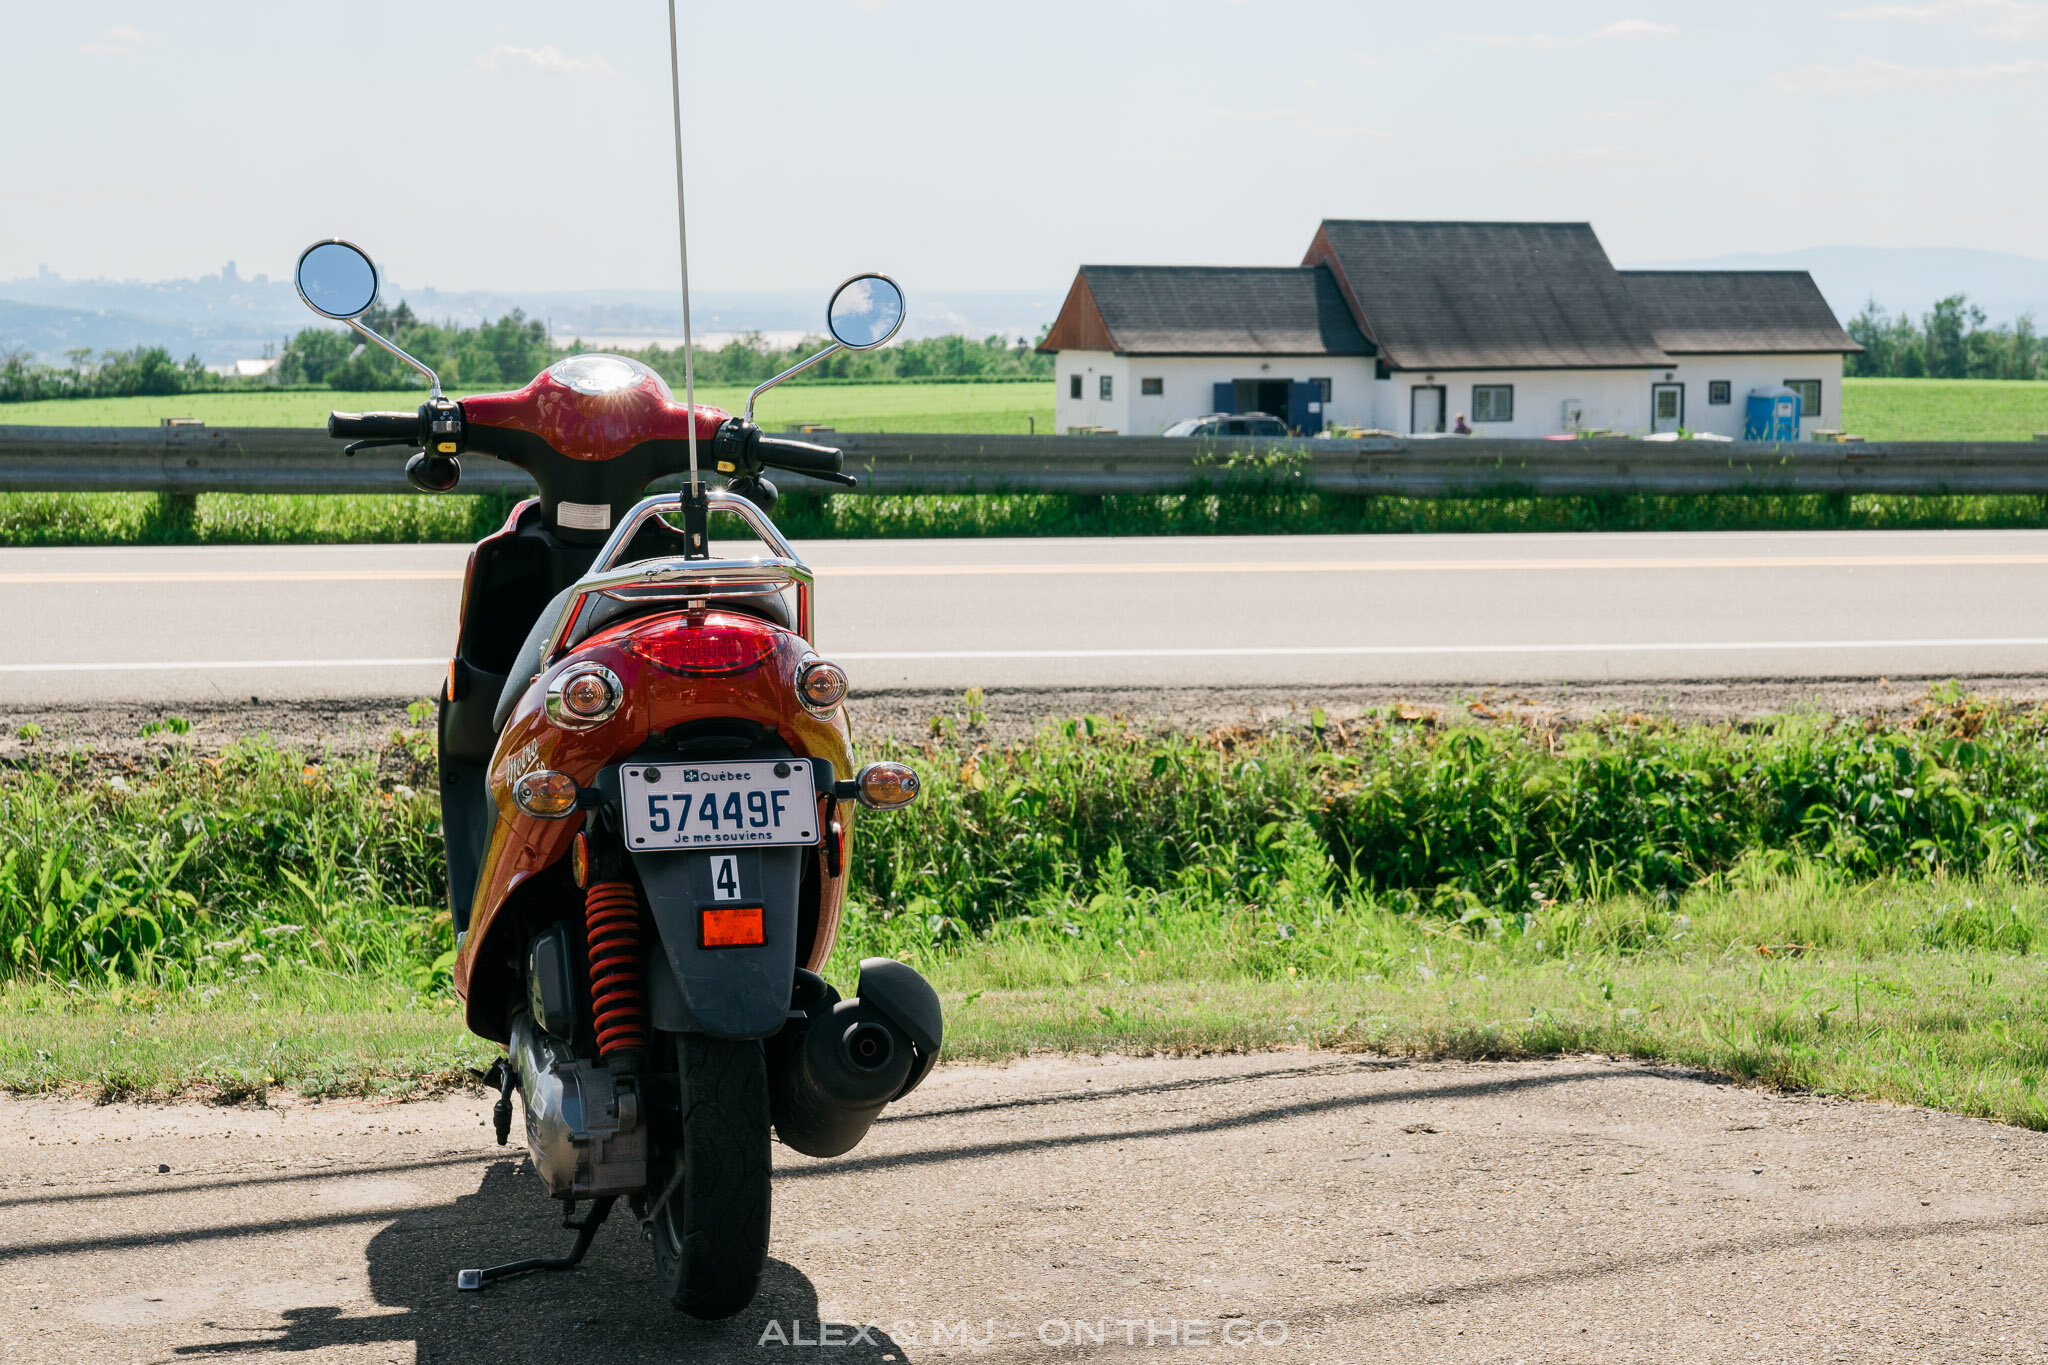 Alex-MJ-On-the-GO-Ile_dOrleans_location_scooter.jpg